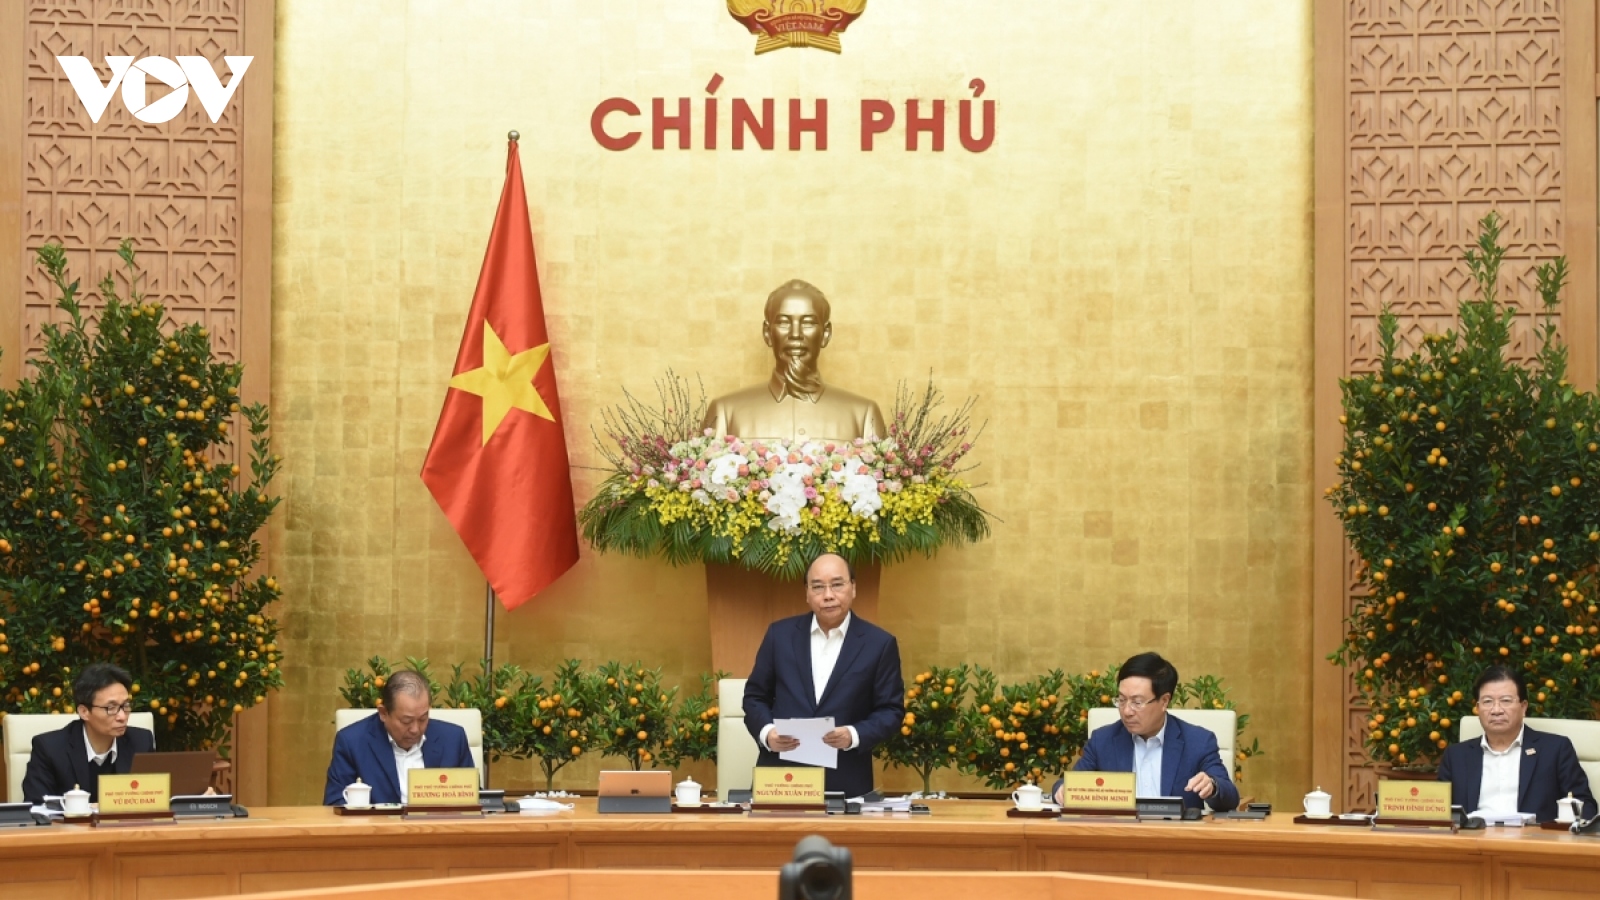 PM Phuc orders COVID-19 vaccine supply to be ready in first quarter